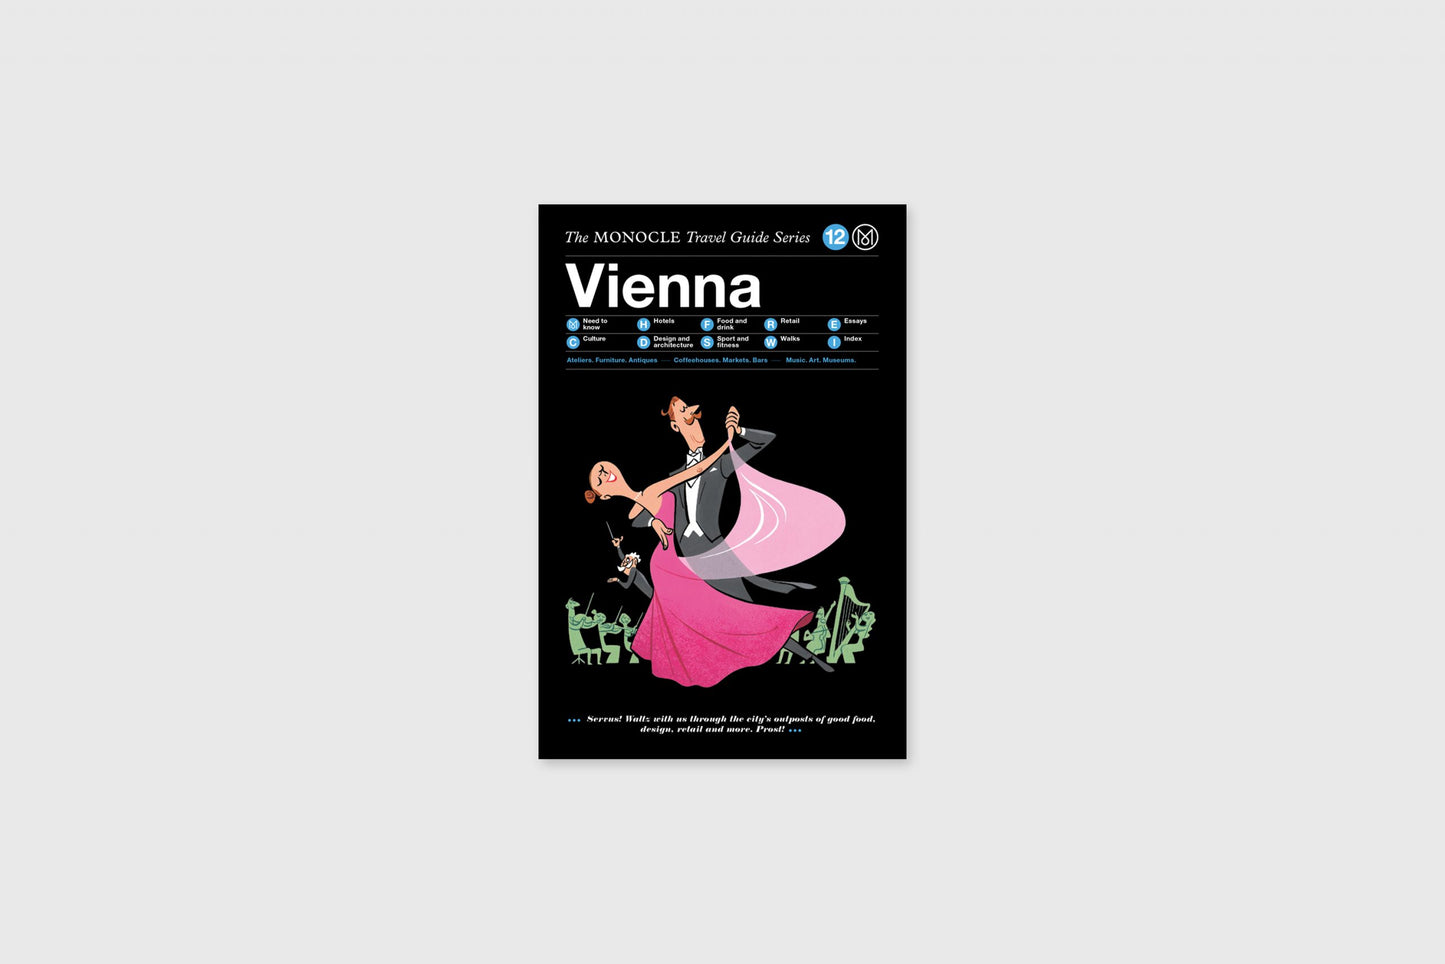 Vienna: The Monocle Travel Guide Series